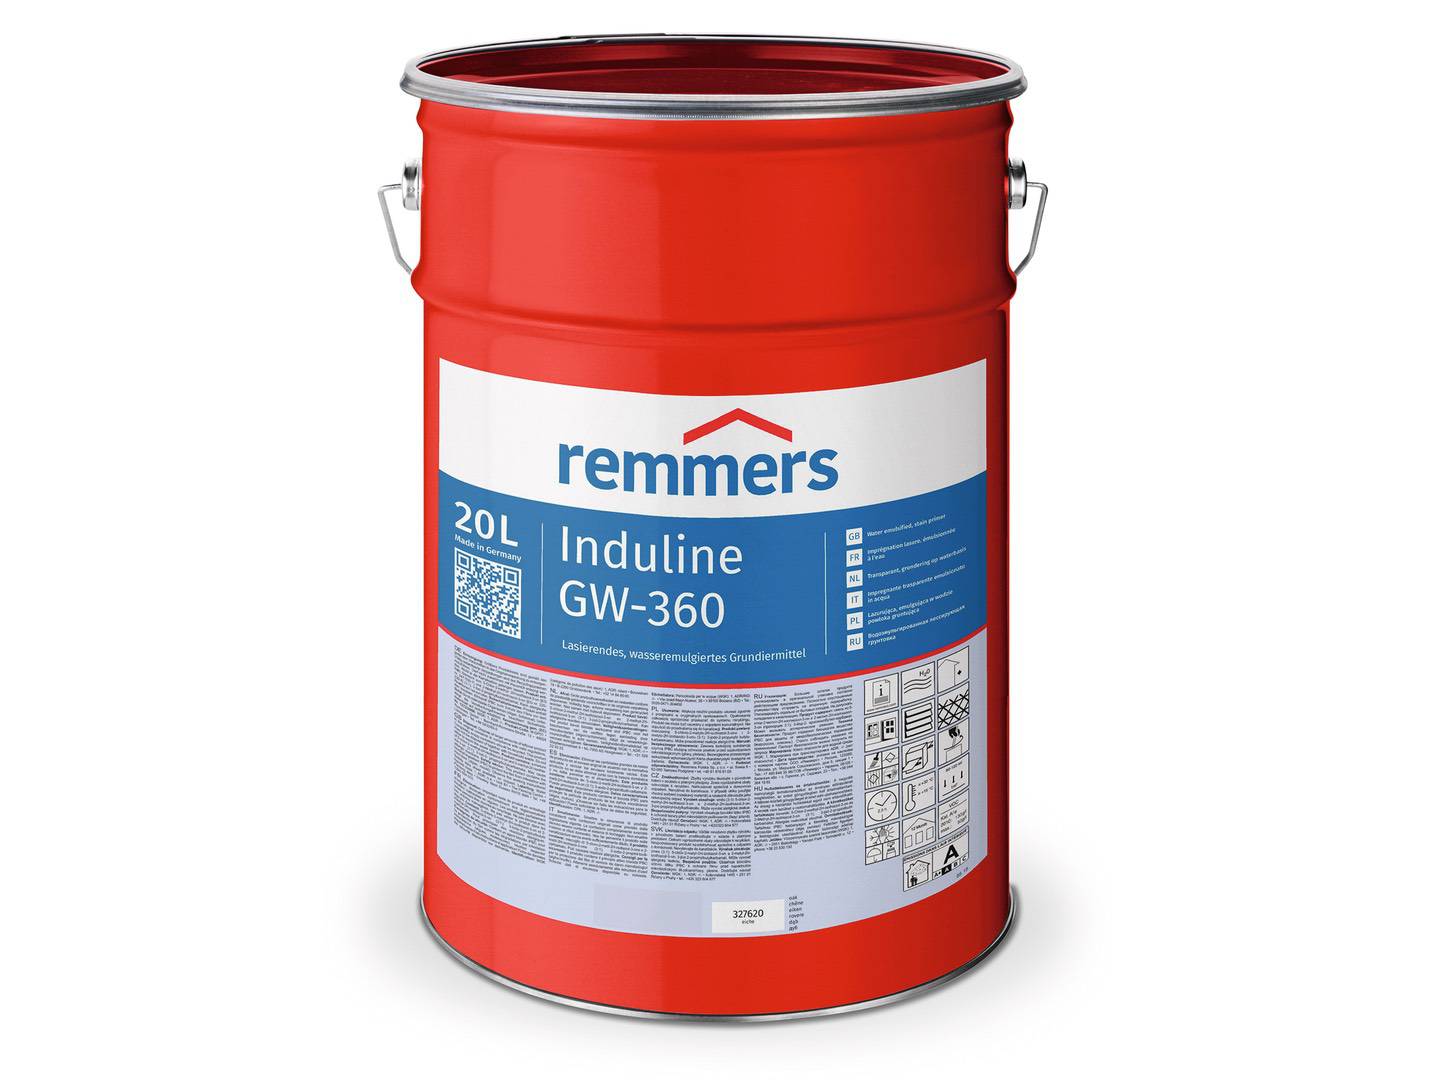 REMMERS Induline GW-360 afromosia (RC-450) 5 l